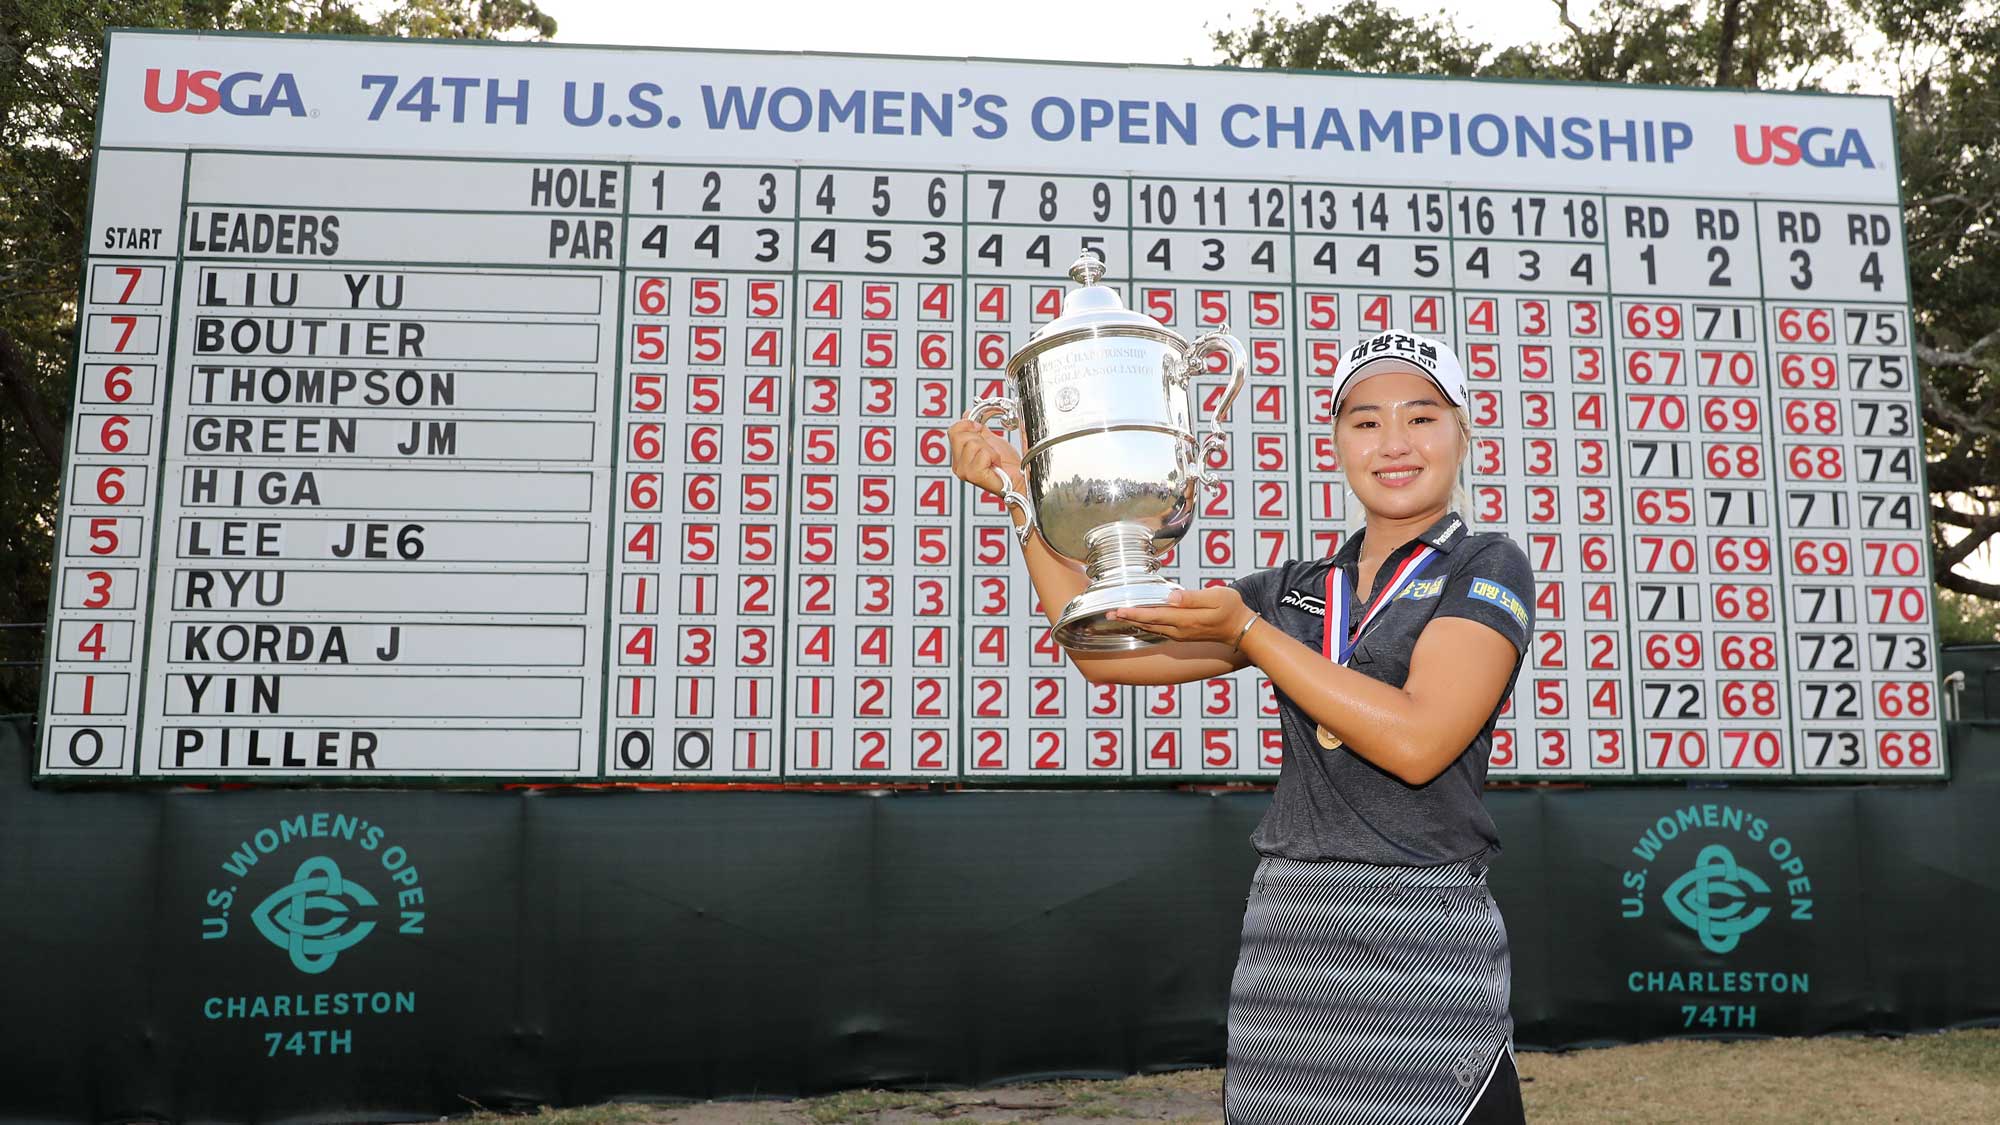 LPGA Tour Announced Additional Changes to 2020 Schedule